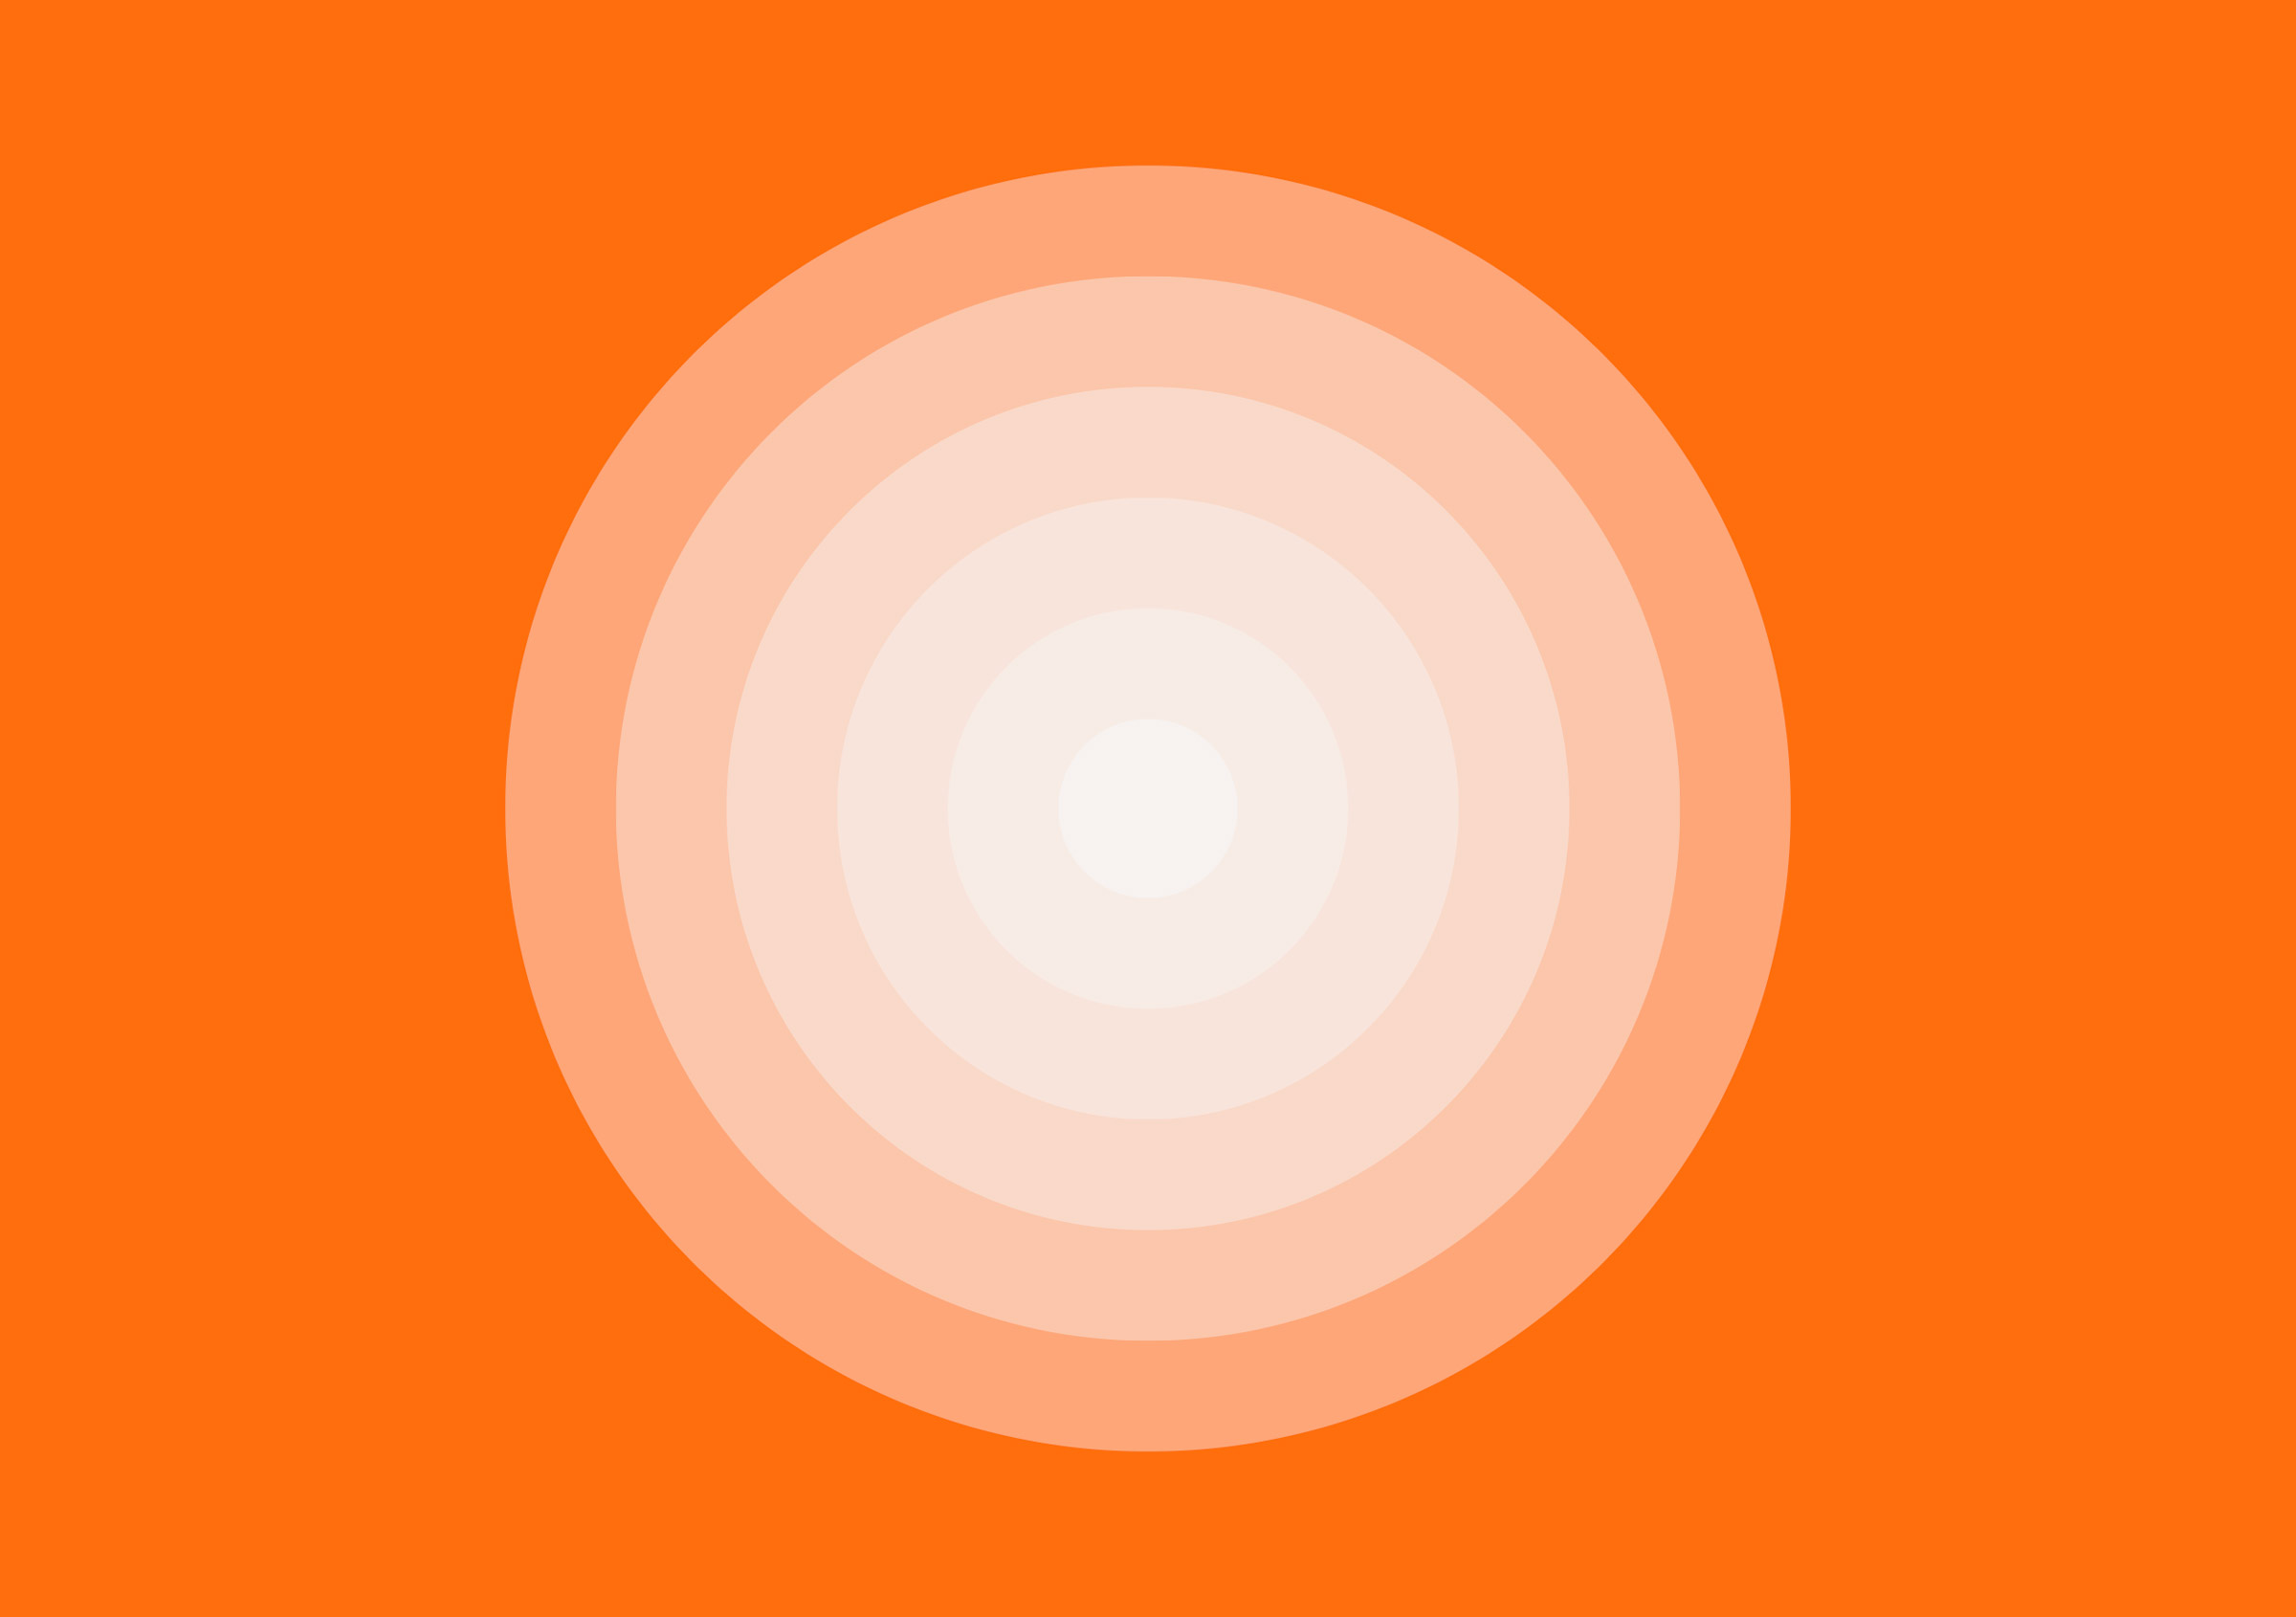 Minimalist concentric circles graphic design with a gradient of peach to white on an orange background, perfect for modern template creation.